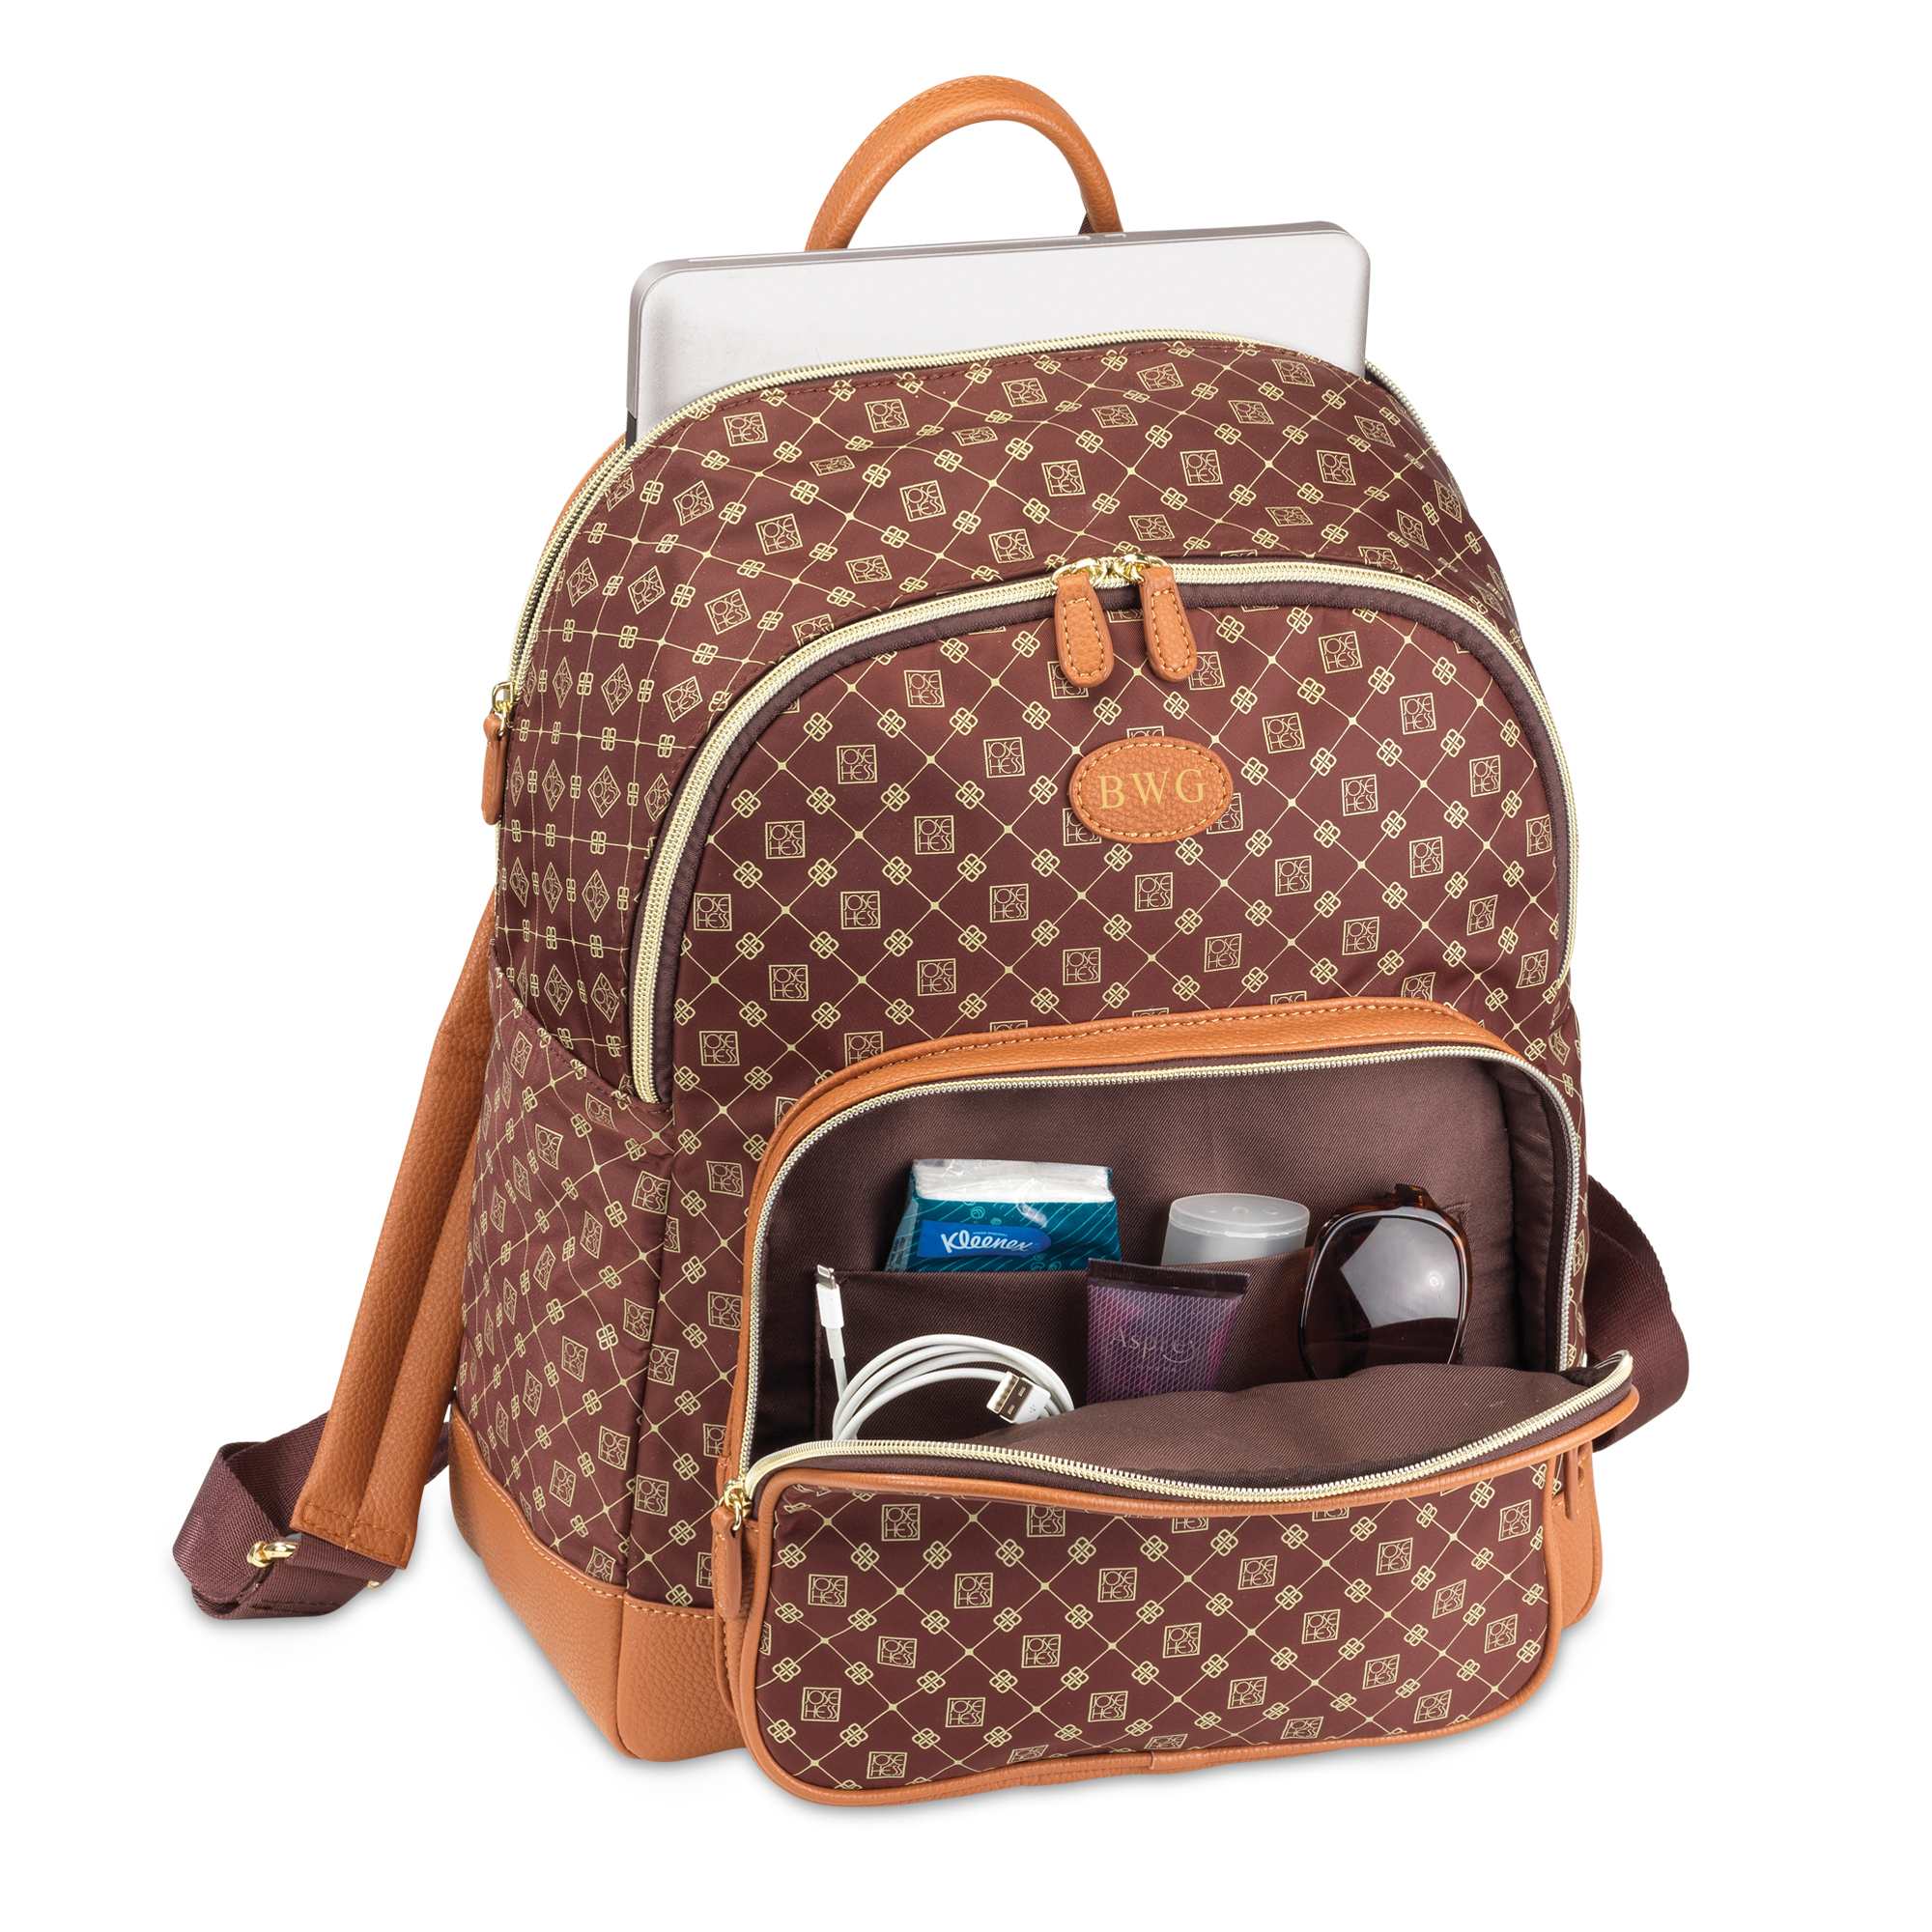 The Ultimate Backpack By Jose Hess 10955 0012 a main